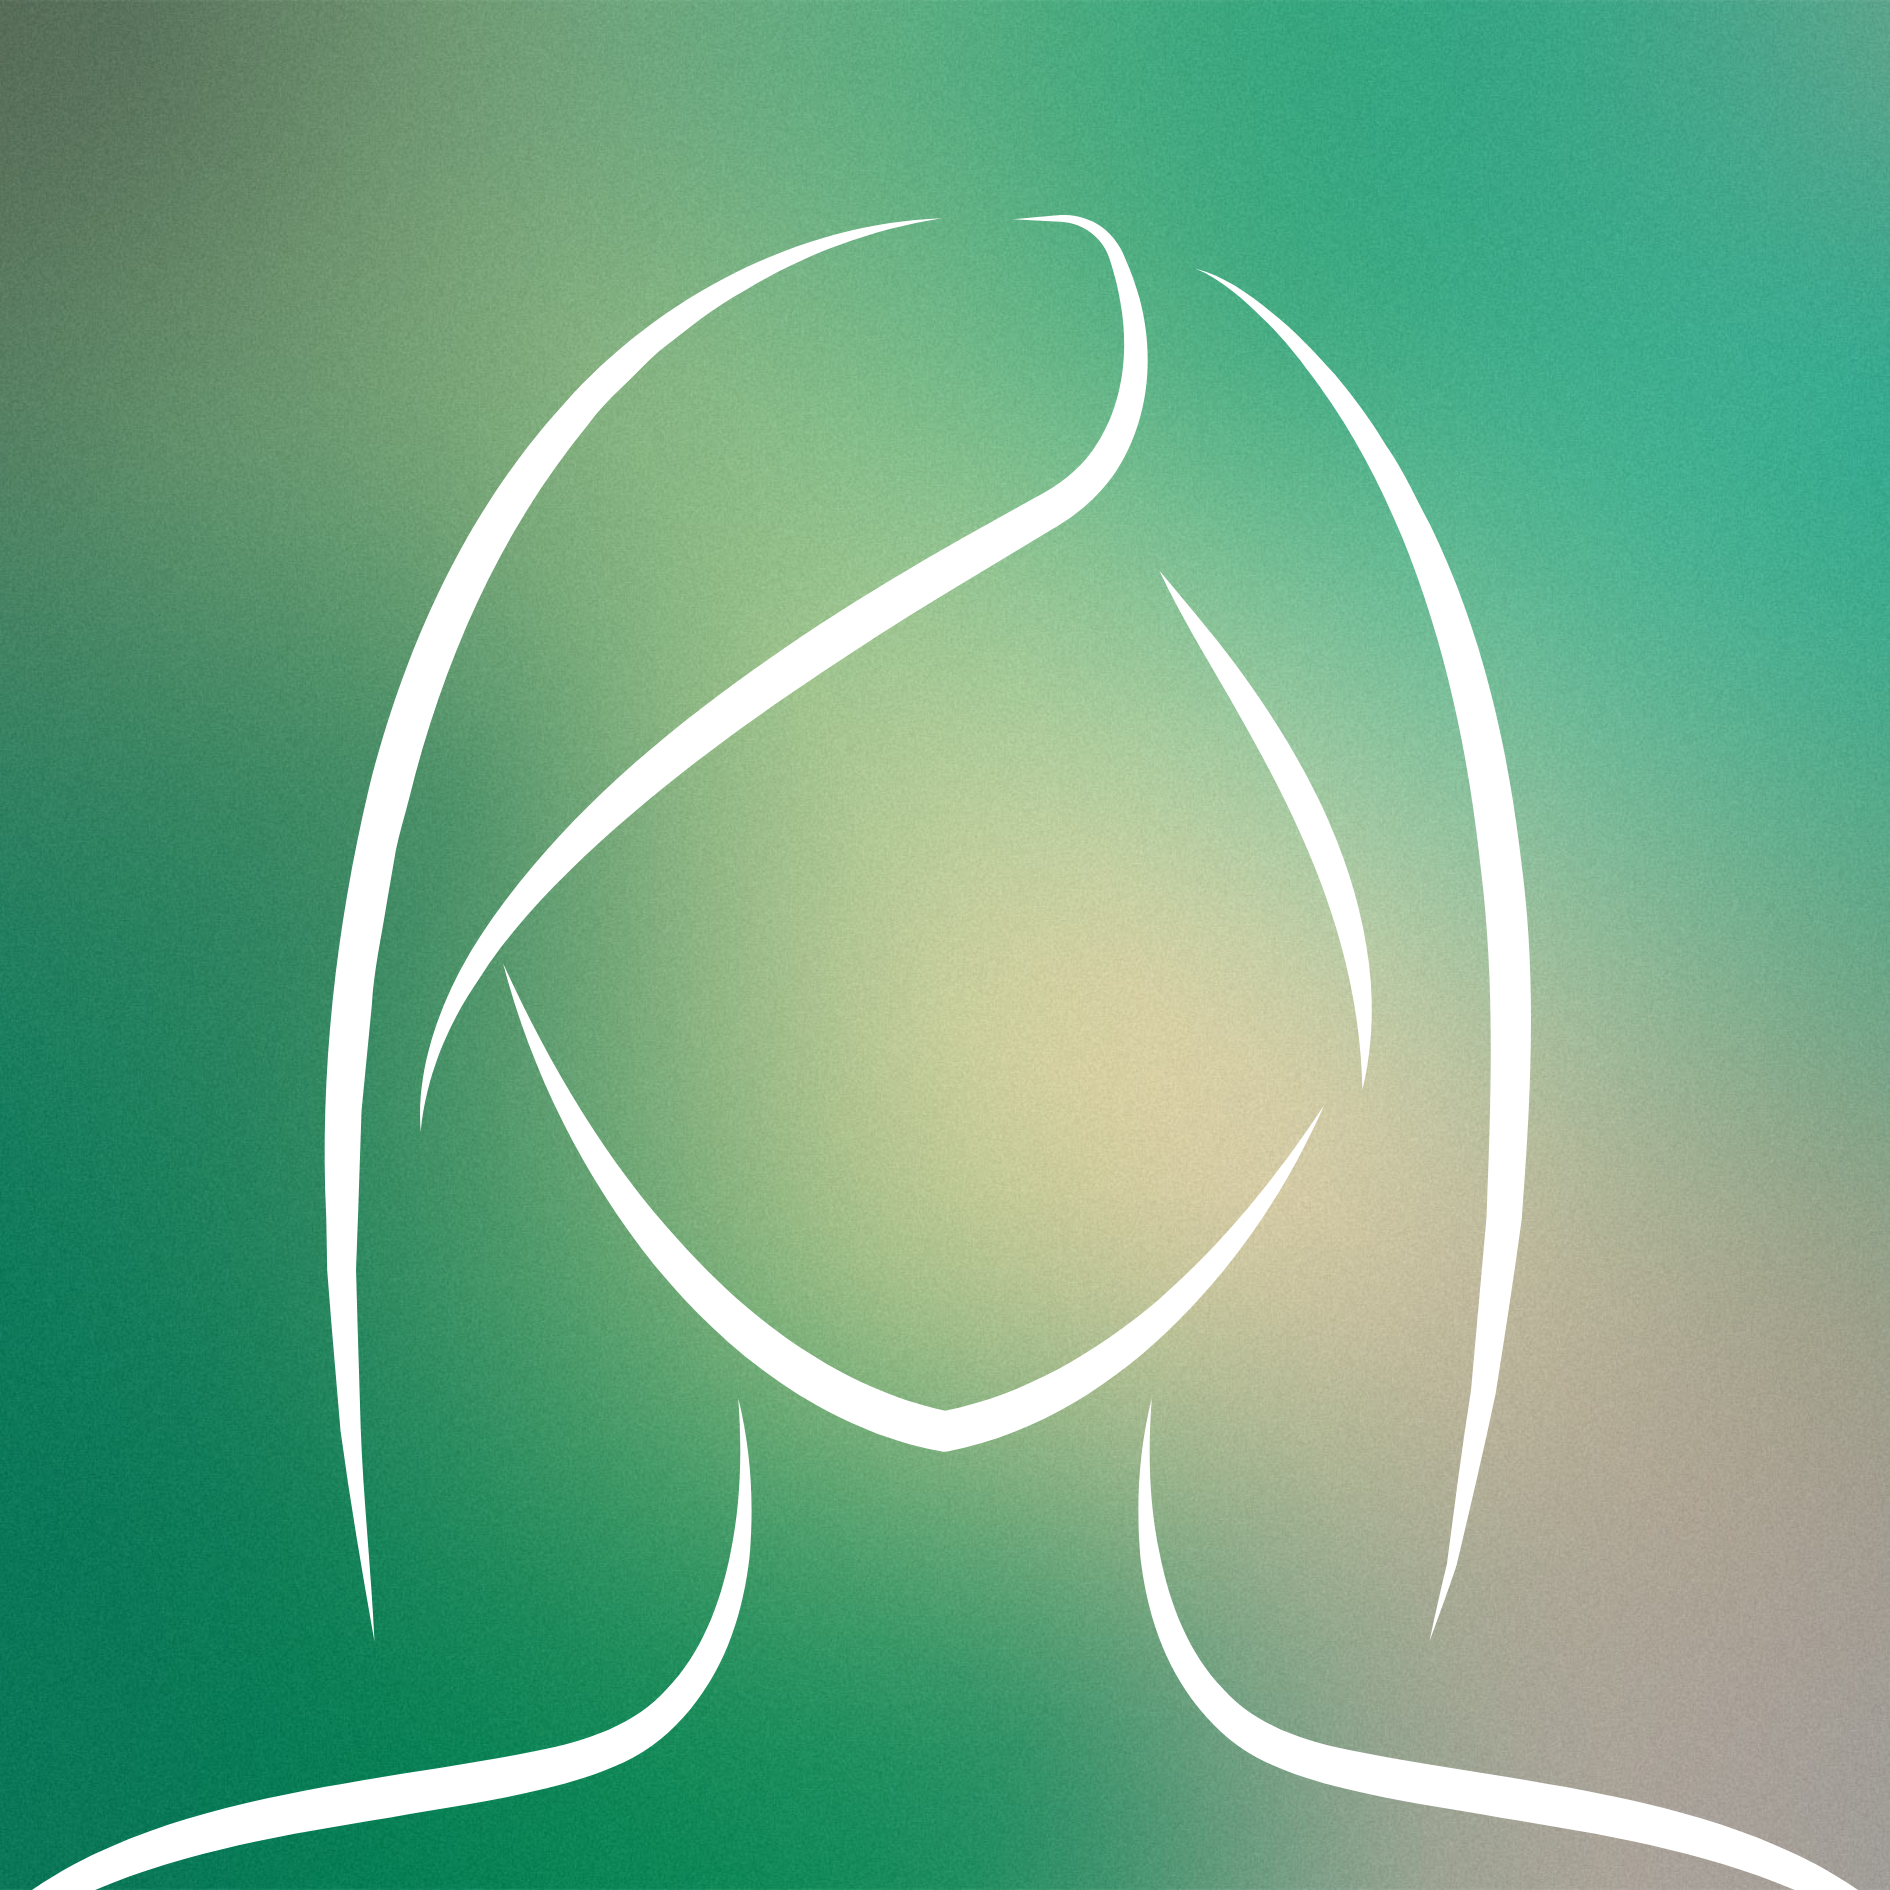 Abstract illustrated person on a green background.